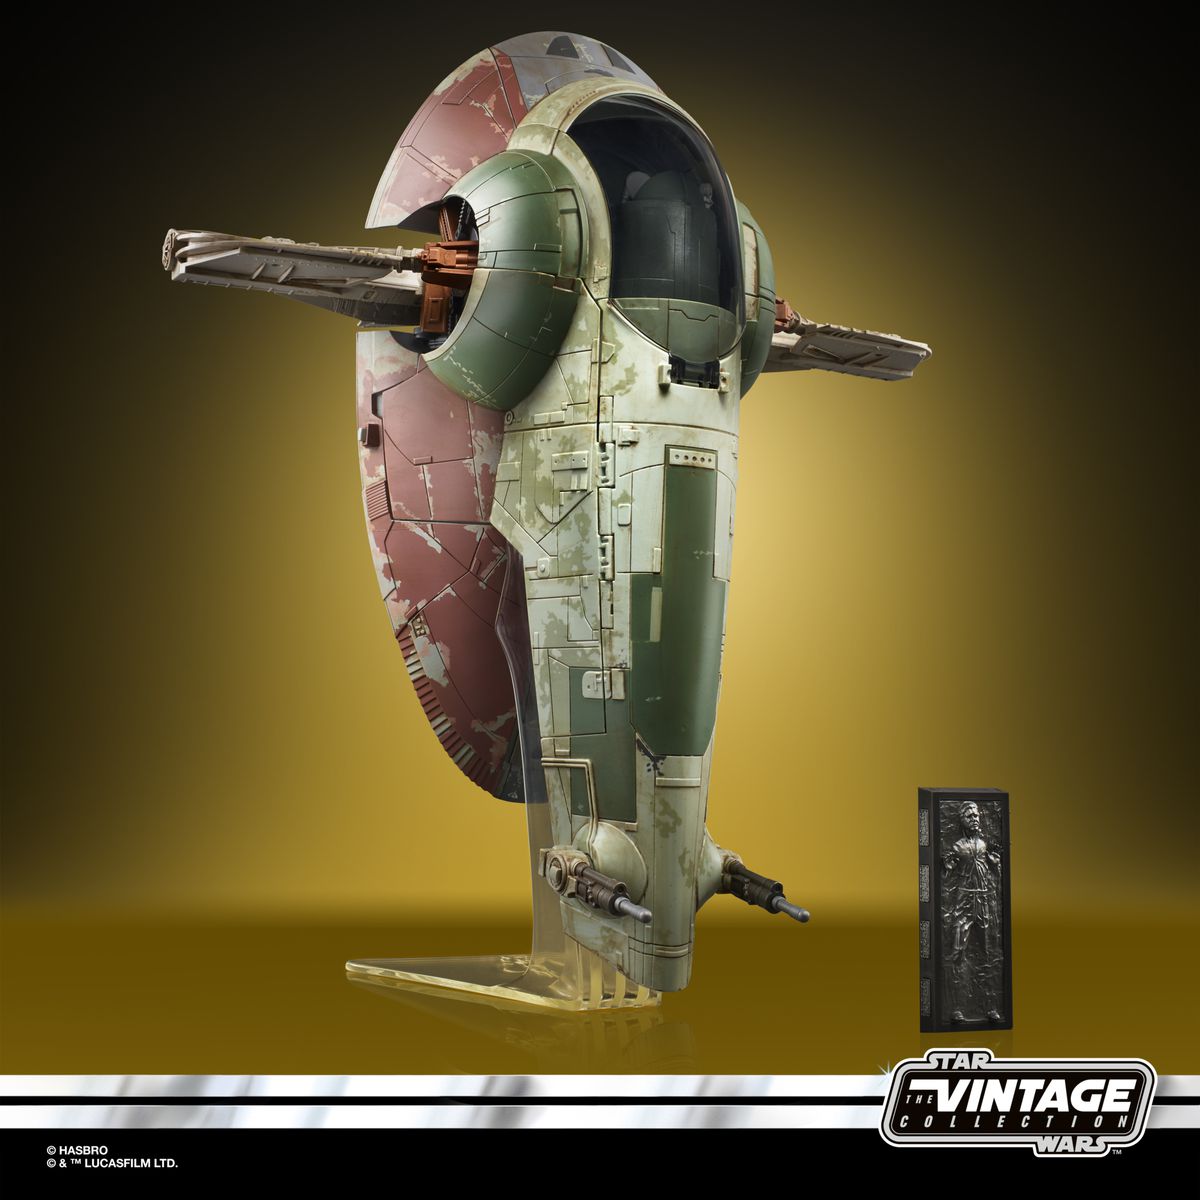 The Vintage Collection’s Slave I replica on a stand with Han in carbonite model next to it